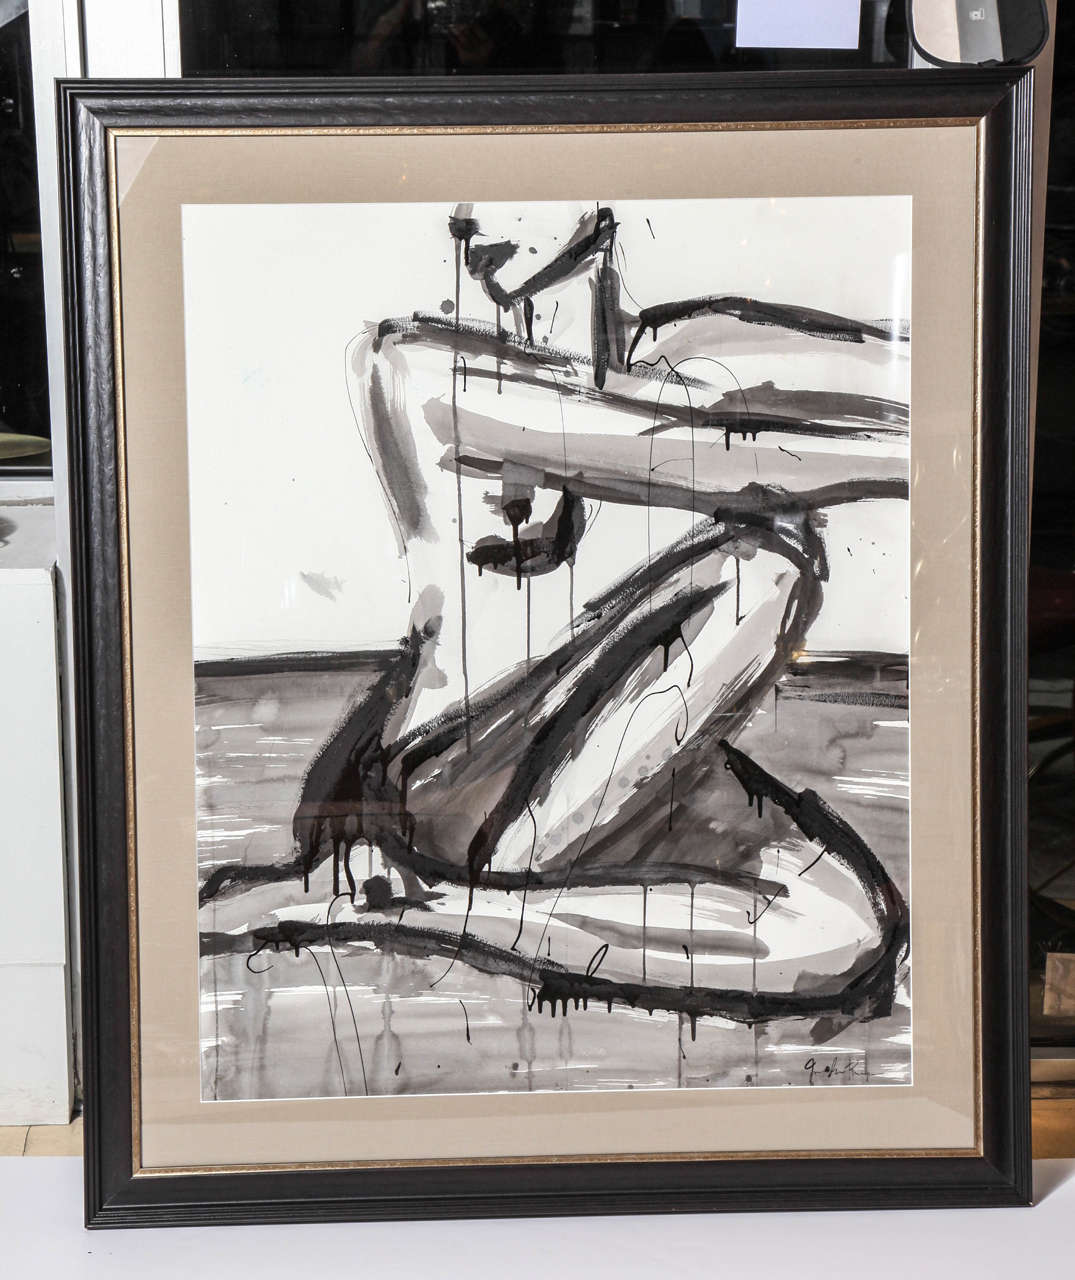 Large nude painting by Jenna Snyder-Phillips. Sumi ink, charcoal and lacquer on 100% archive paper. Beautifully framed.